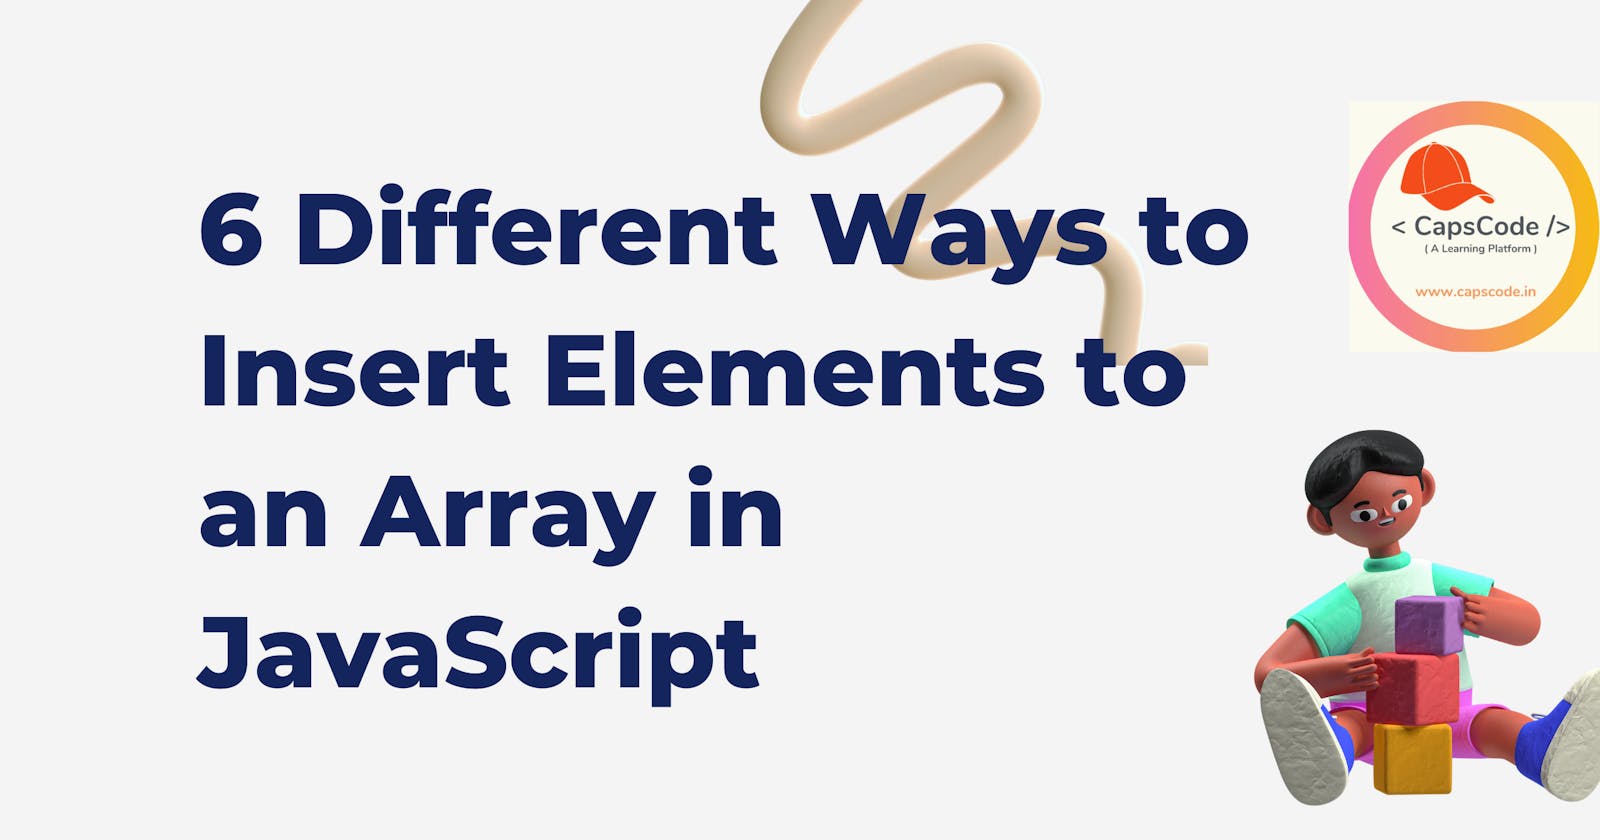 6 Different Ways to Insert Elements to an Array in JavaScript